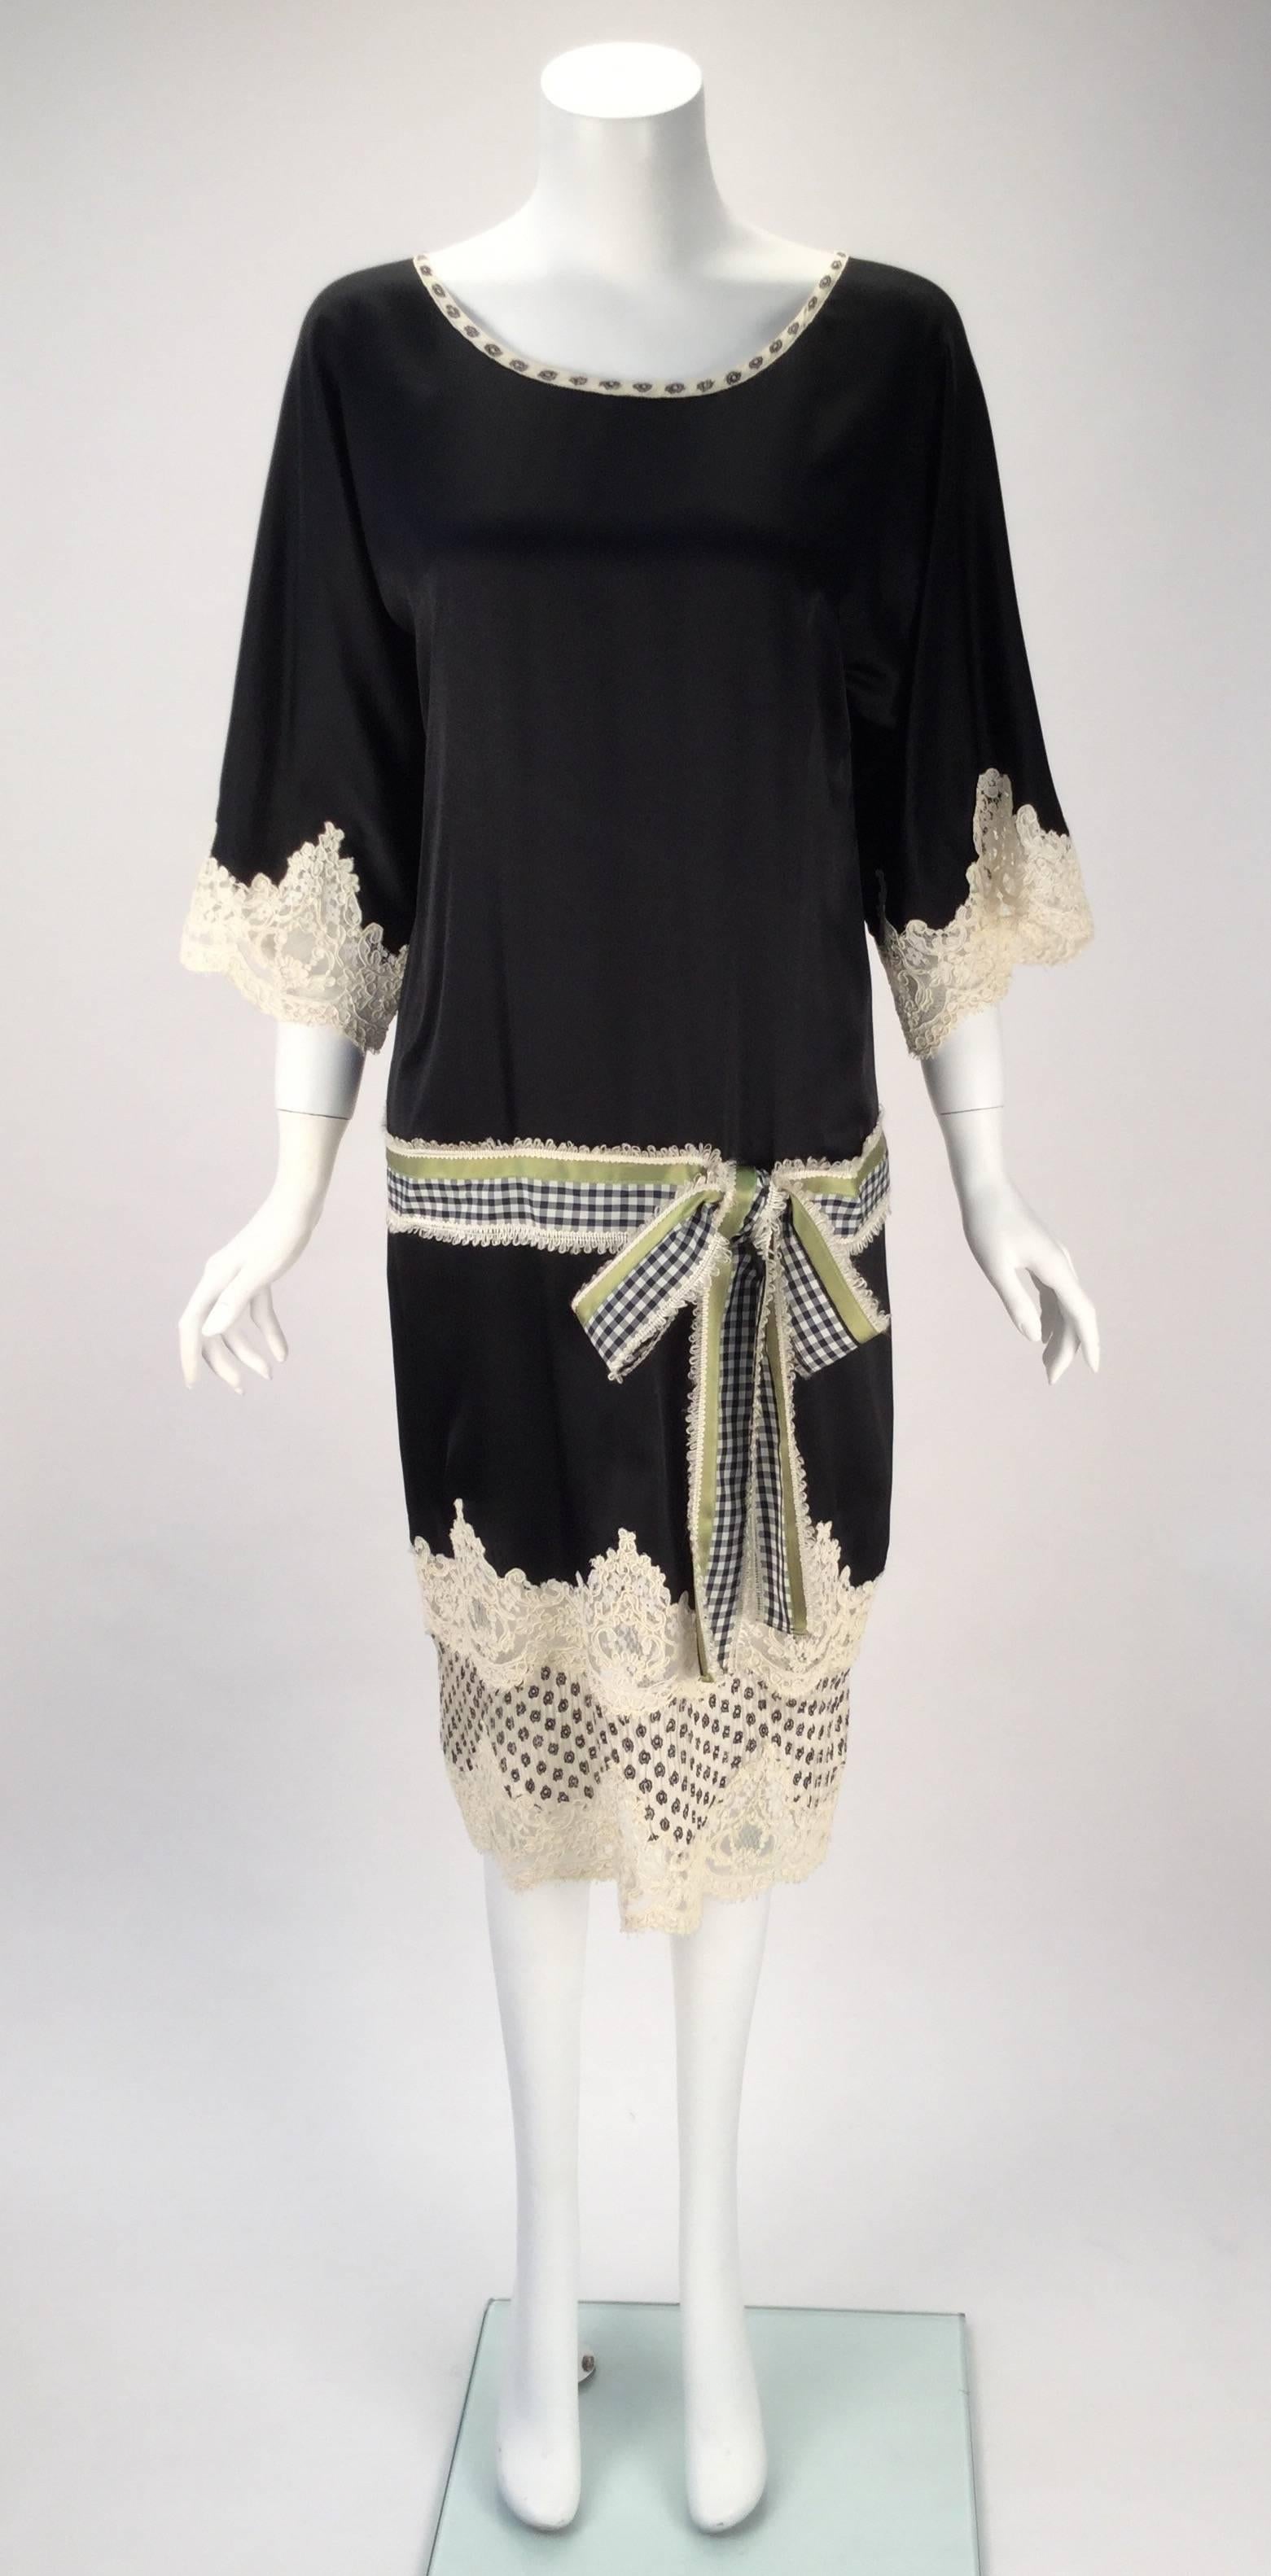 Beautiful, sweet, and fun Geoffrey Beene black dress. The dress is made of silk with alencon lace. Lovely kimono sleeves fall from the shift shaped bodice. The alecon lace trim dangles from both the sleeves and hem. The belt is made up of Navy blue